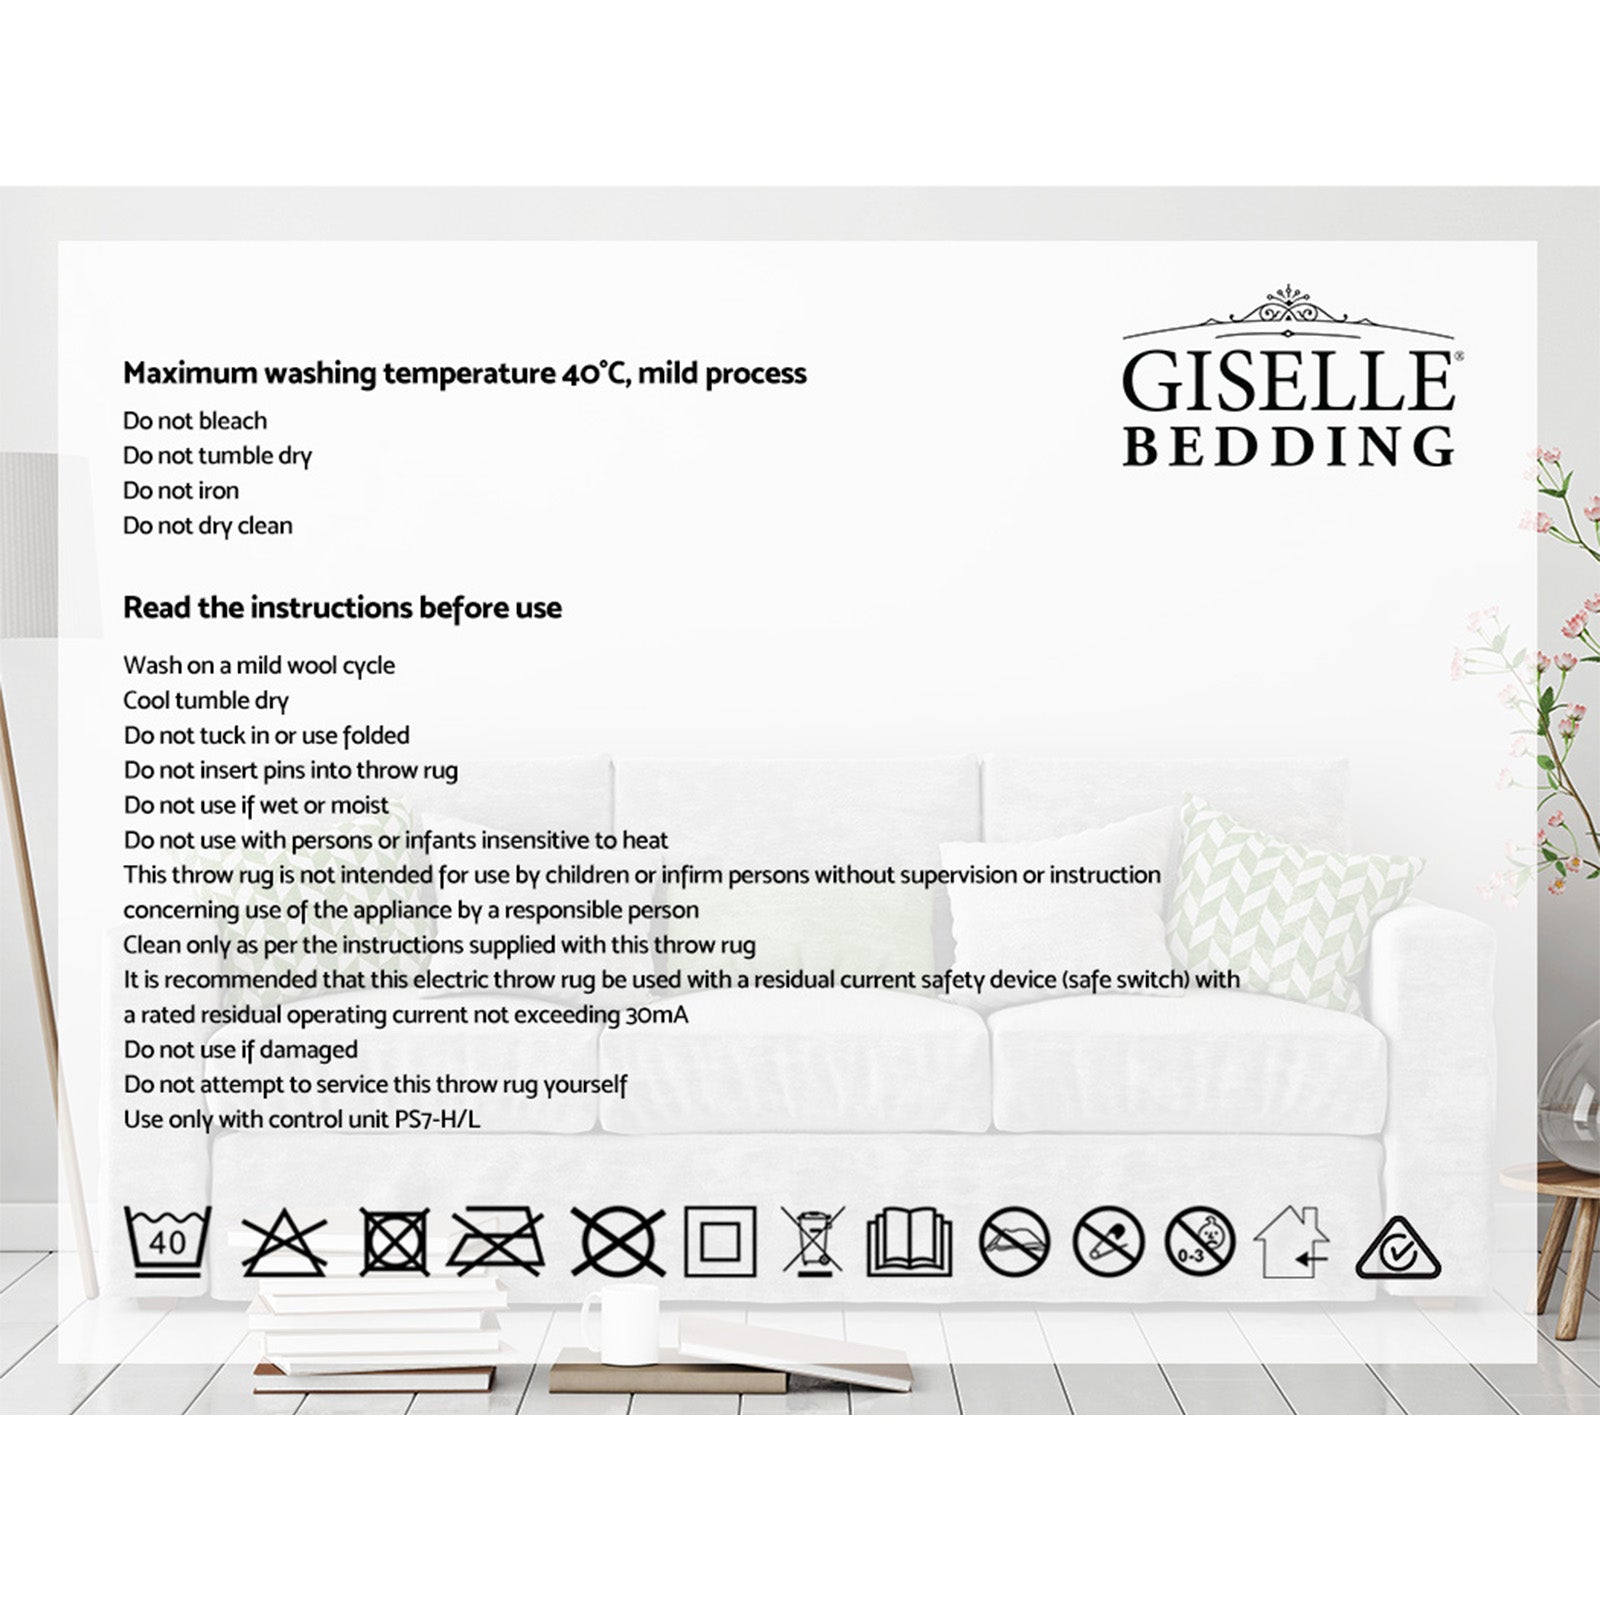 Giselle Bedding Care Instructions